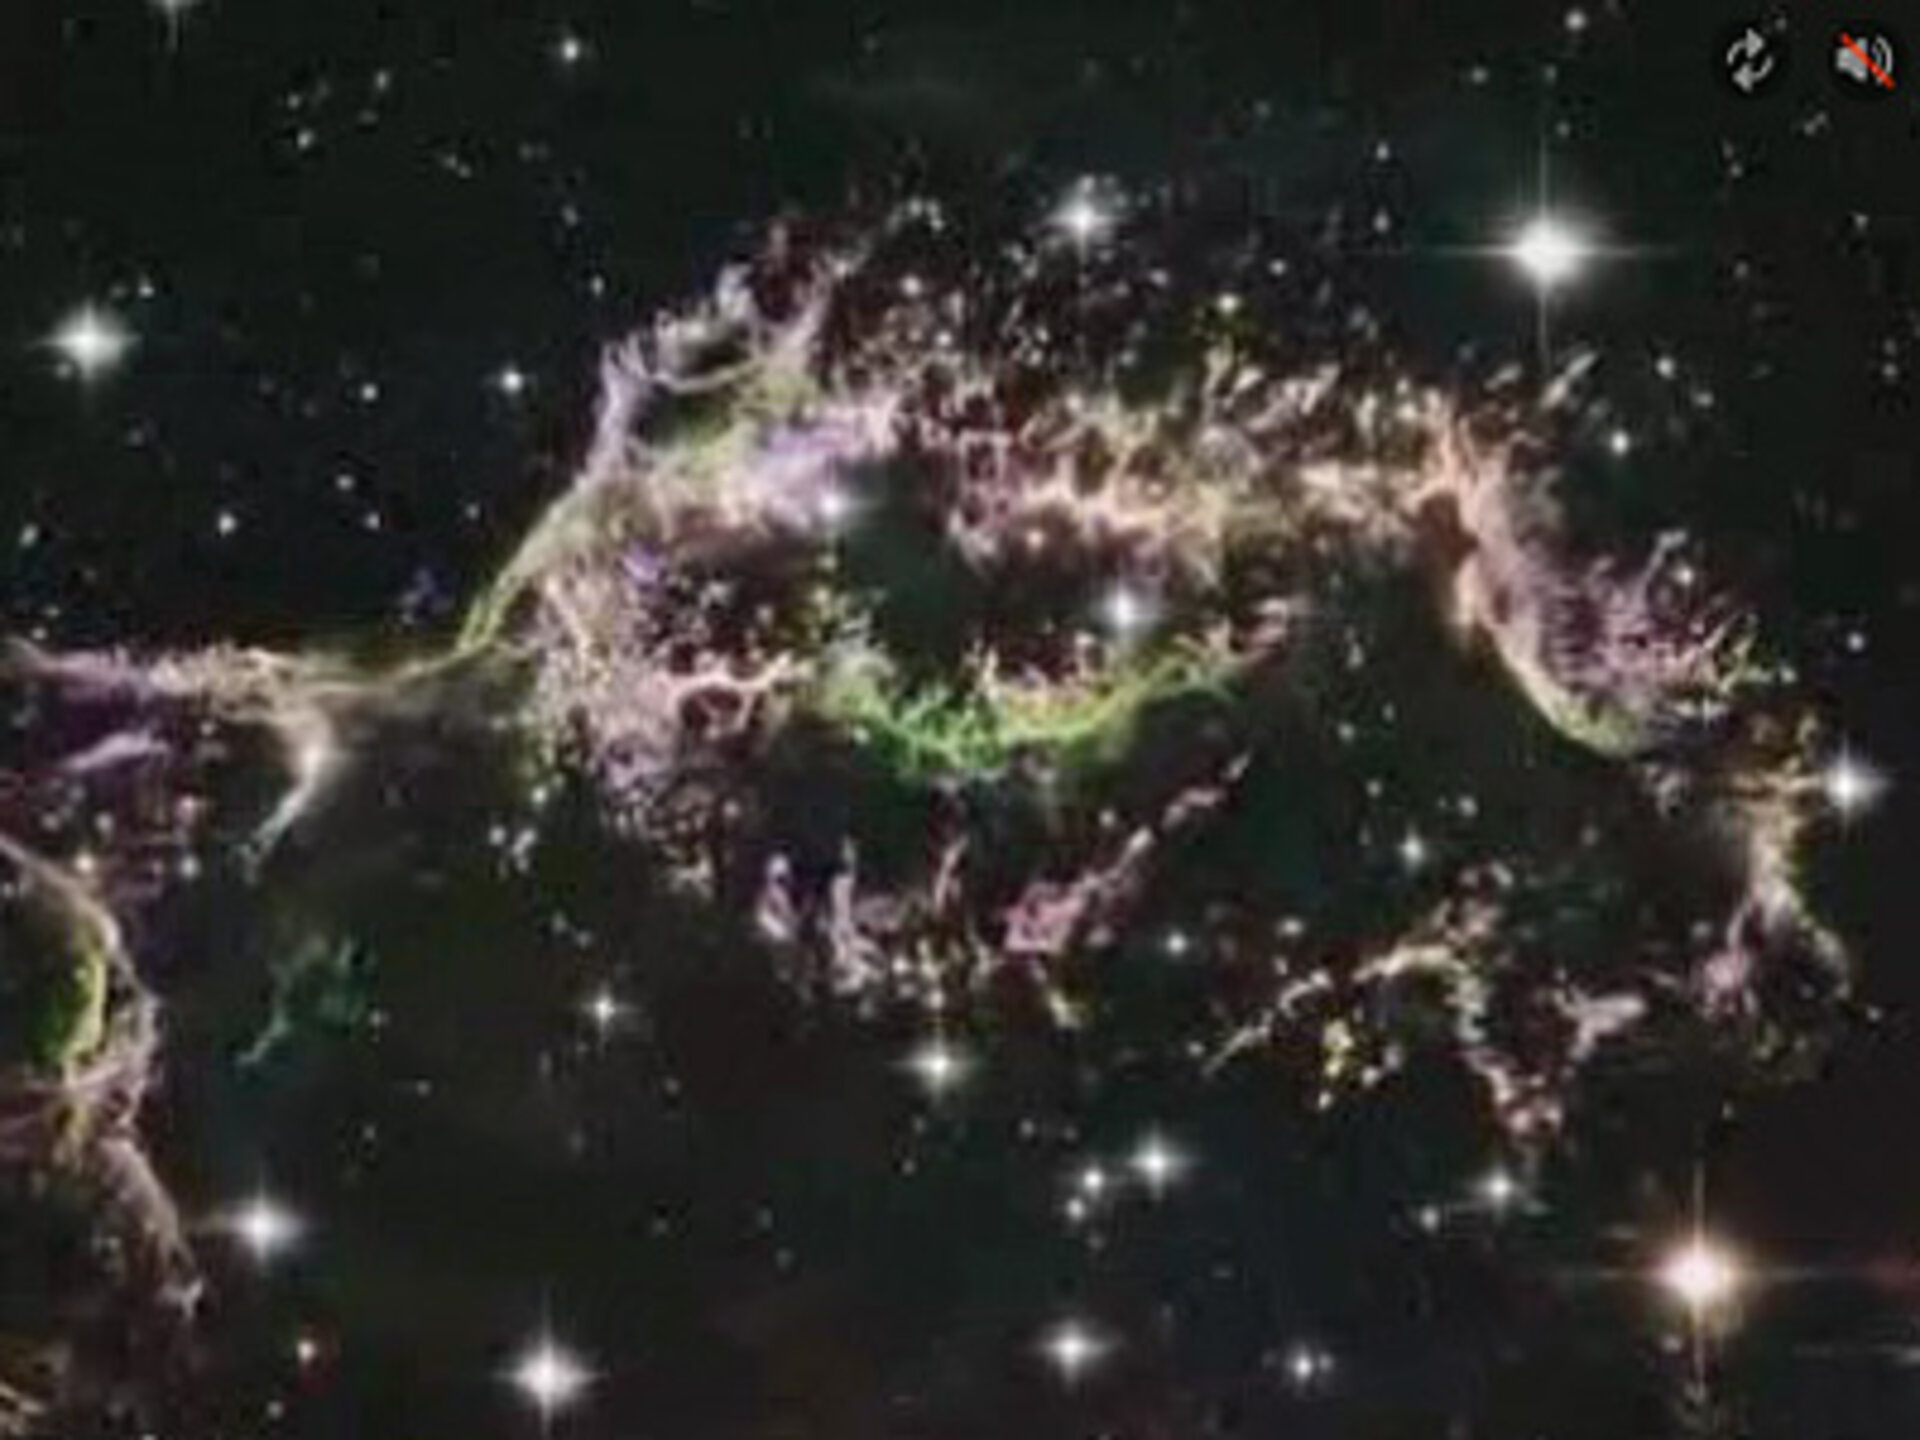 Zooming on Cassiopeia A